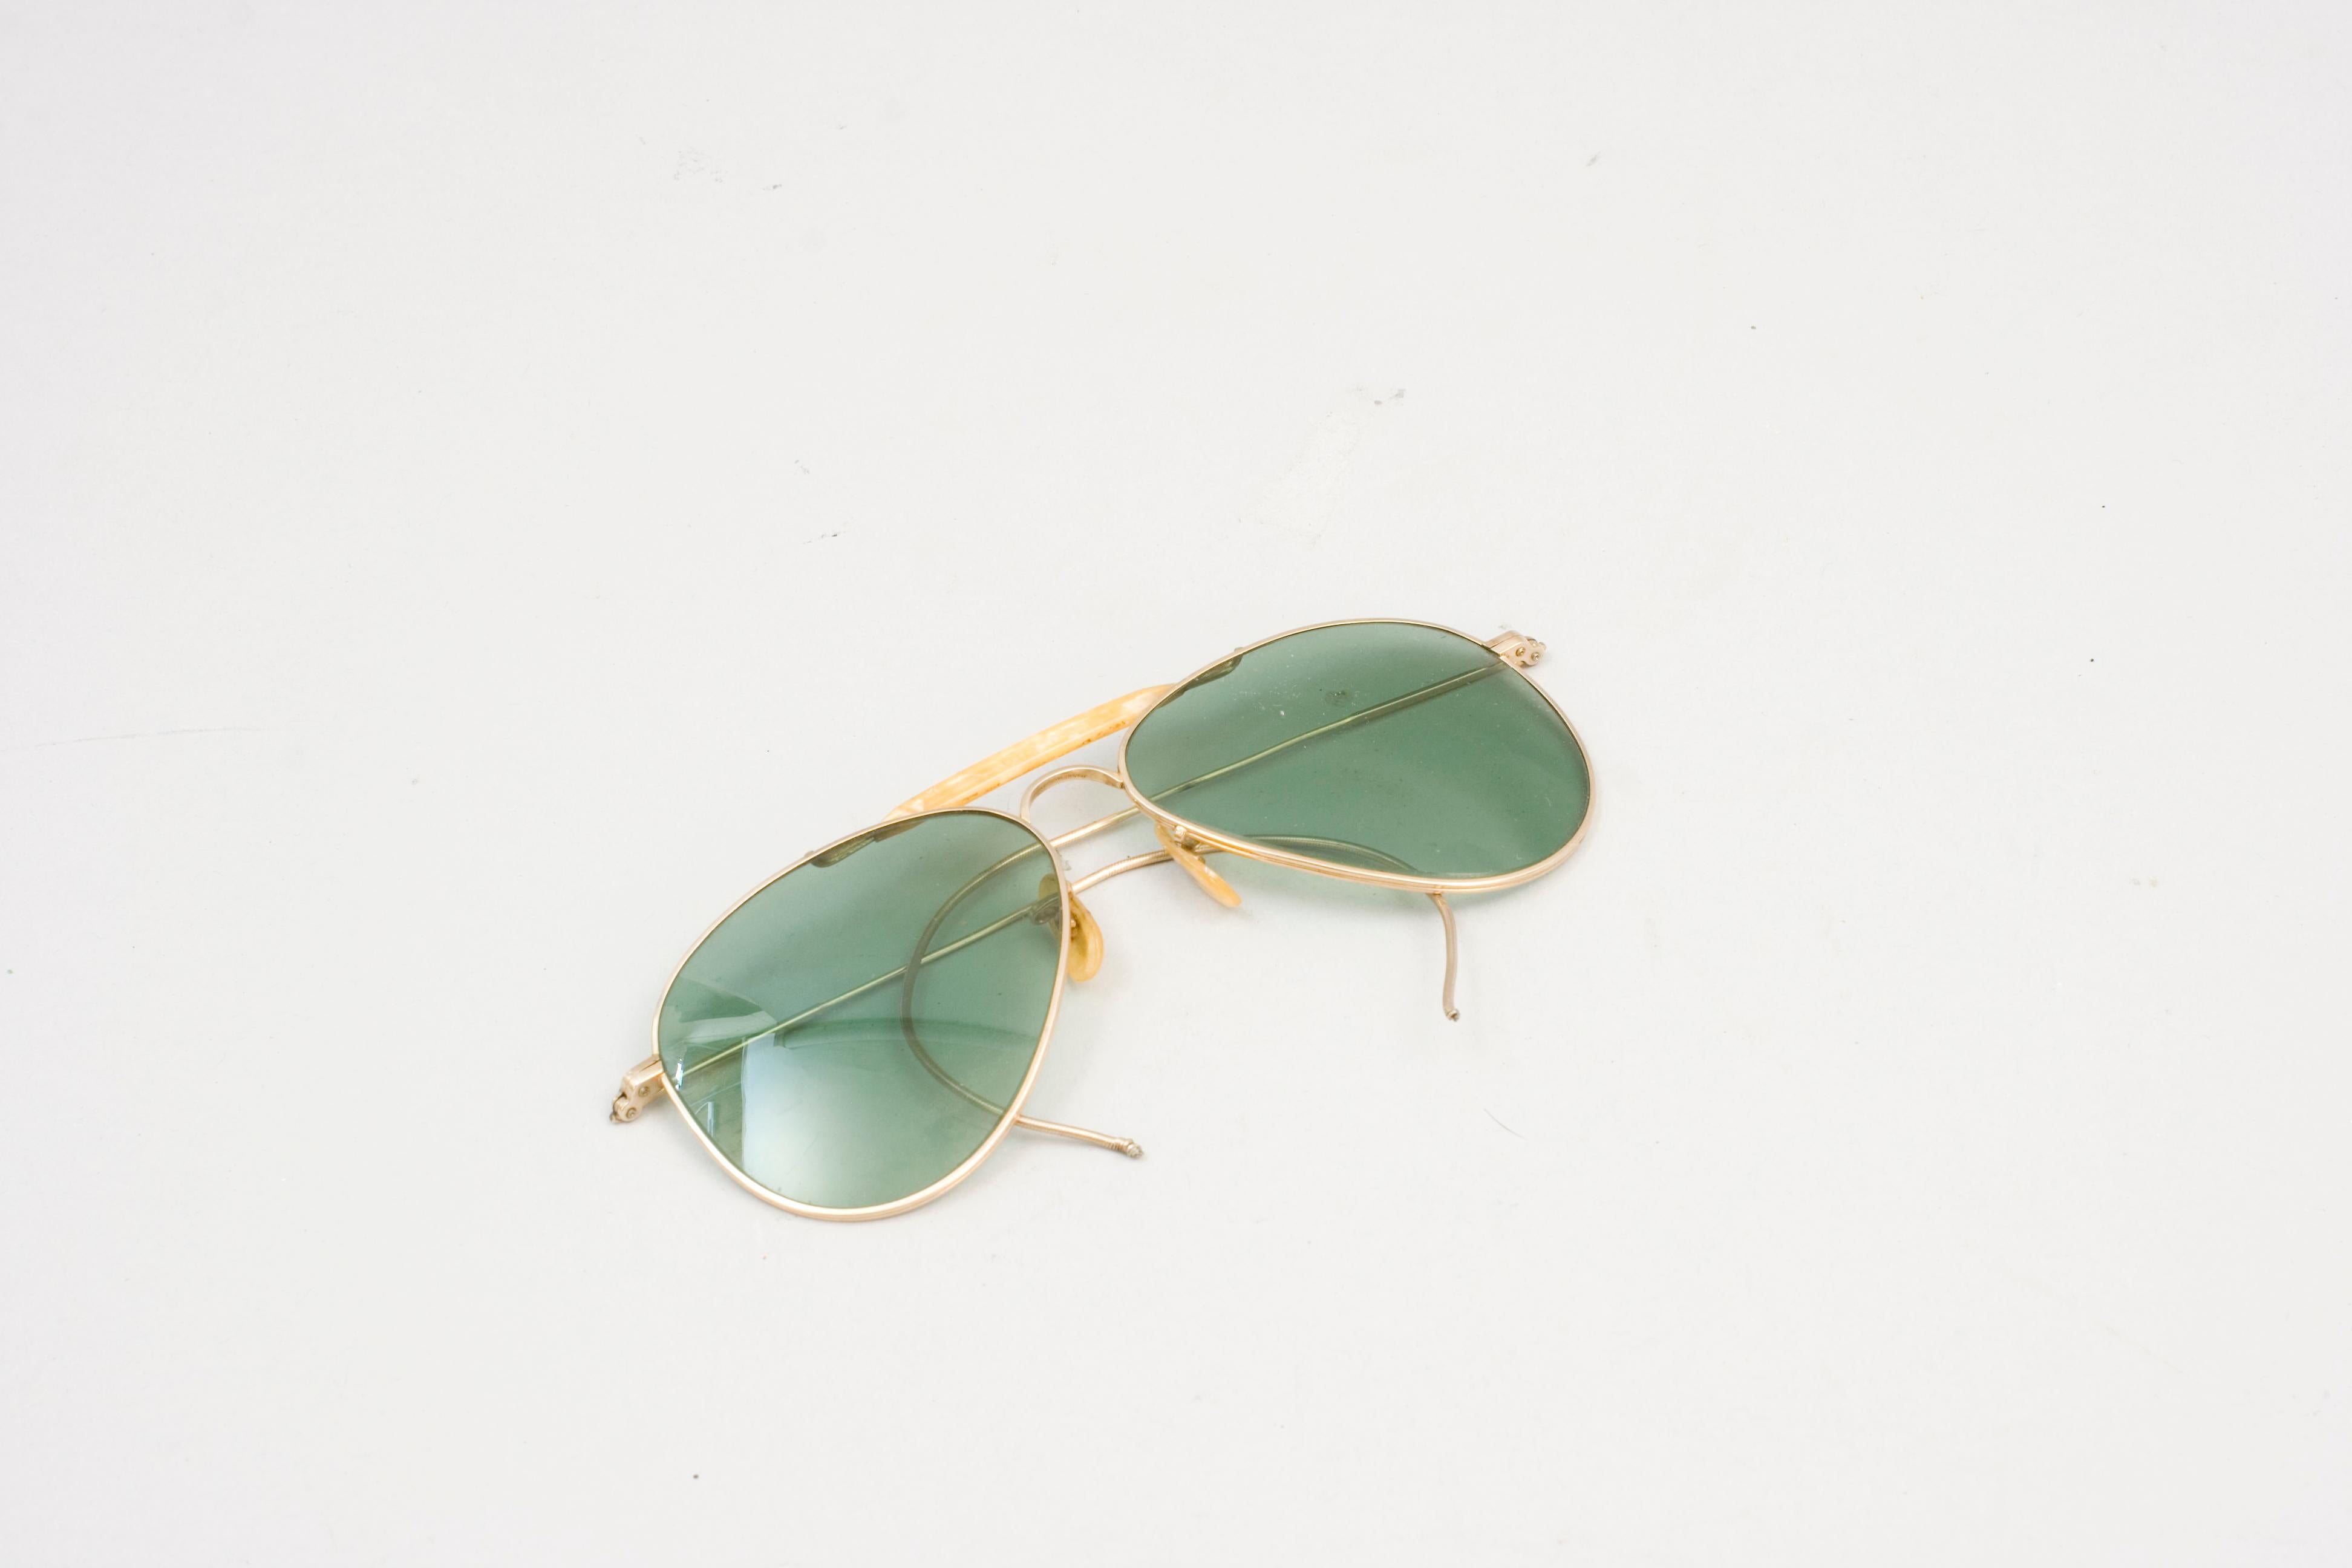 Vintage Aviator, Pilot Sunglasses.
A very good pair of aviator sunglasses, the frames are engraved on the bottom of the nose bar with 'Shuron, FUL-VUE 1/10 12K GF'. The frame is gold filled with 12k gold and the arms are made of gold coloured metal